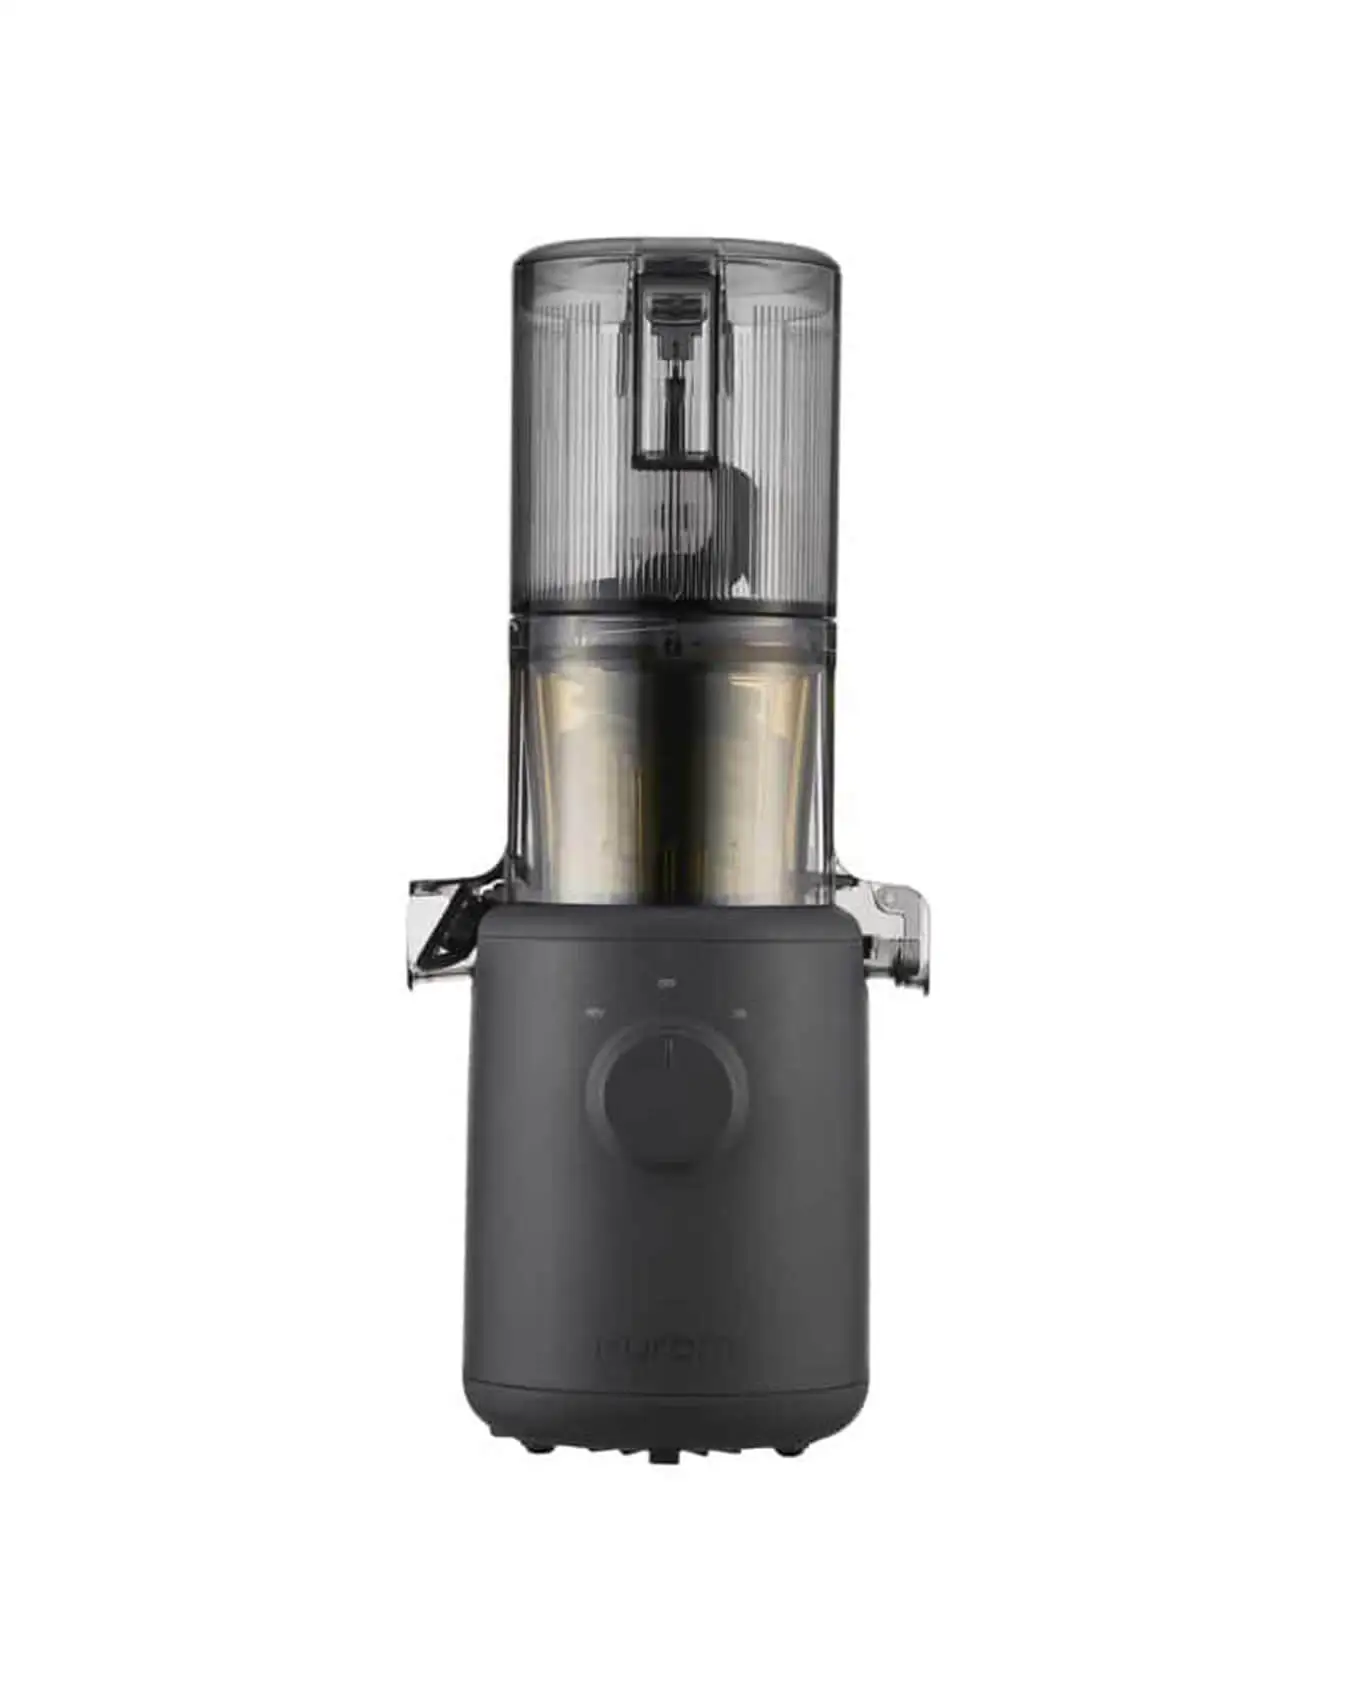 Hurom H310A Slow Juicer Entsafter bei nettoshop